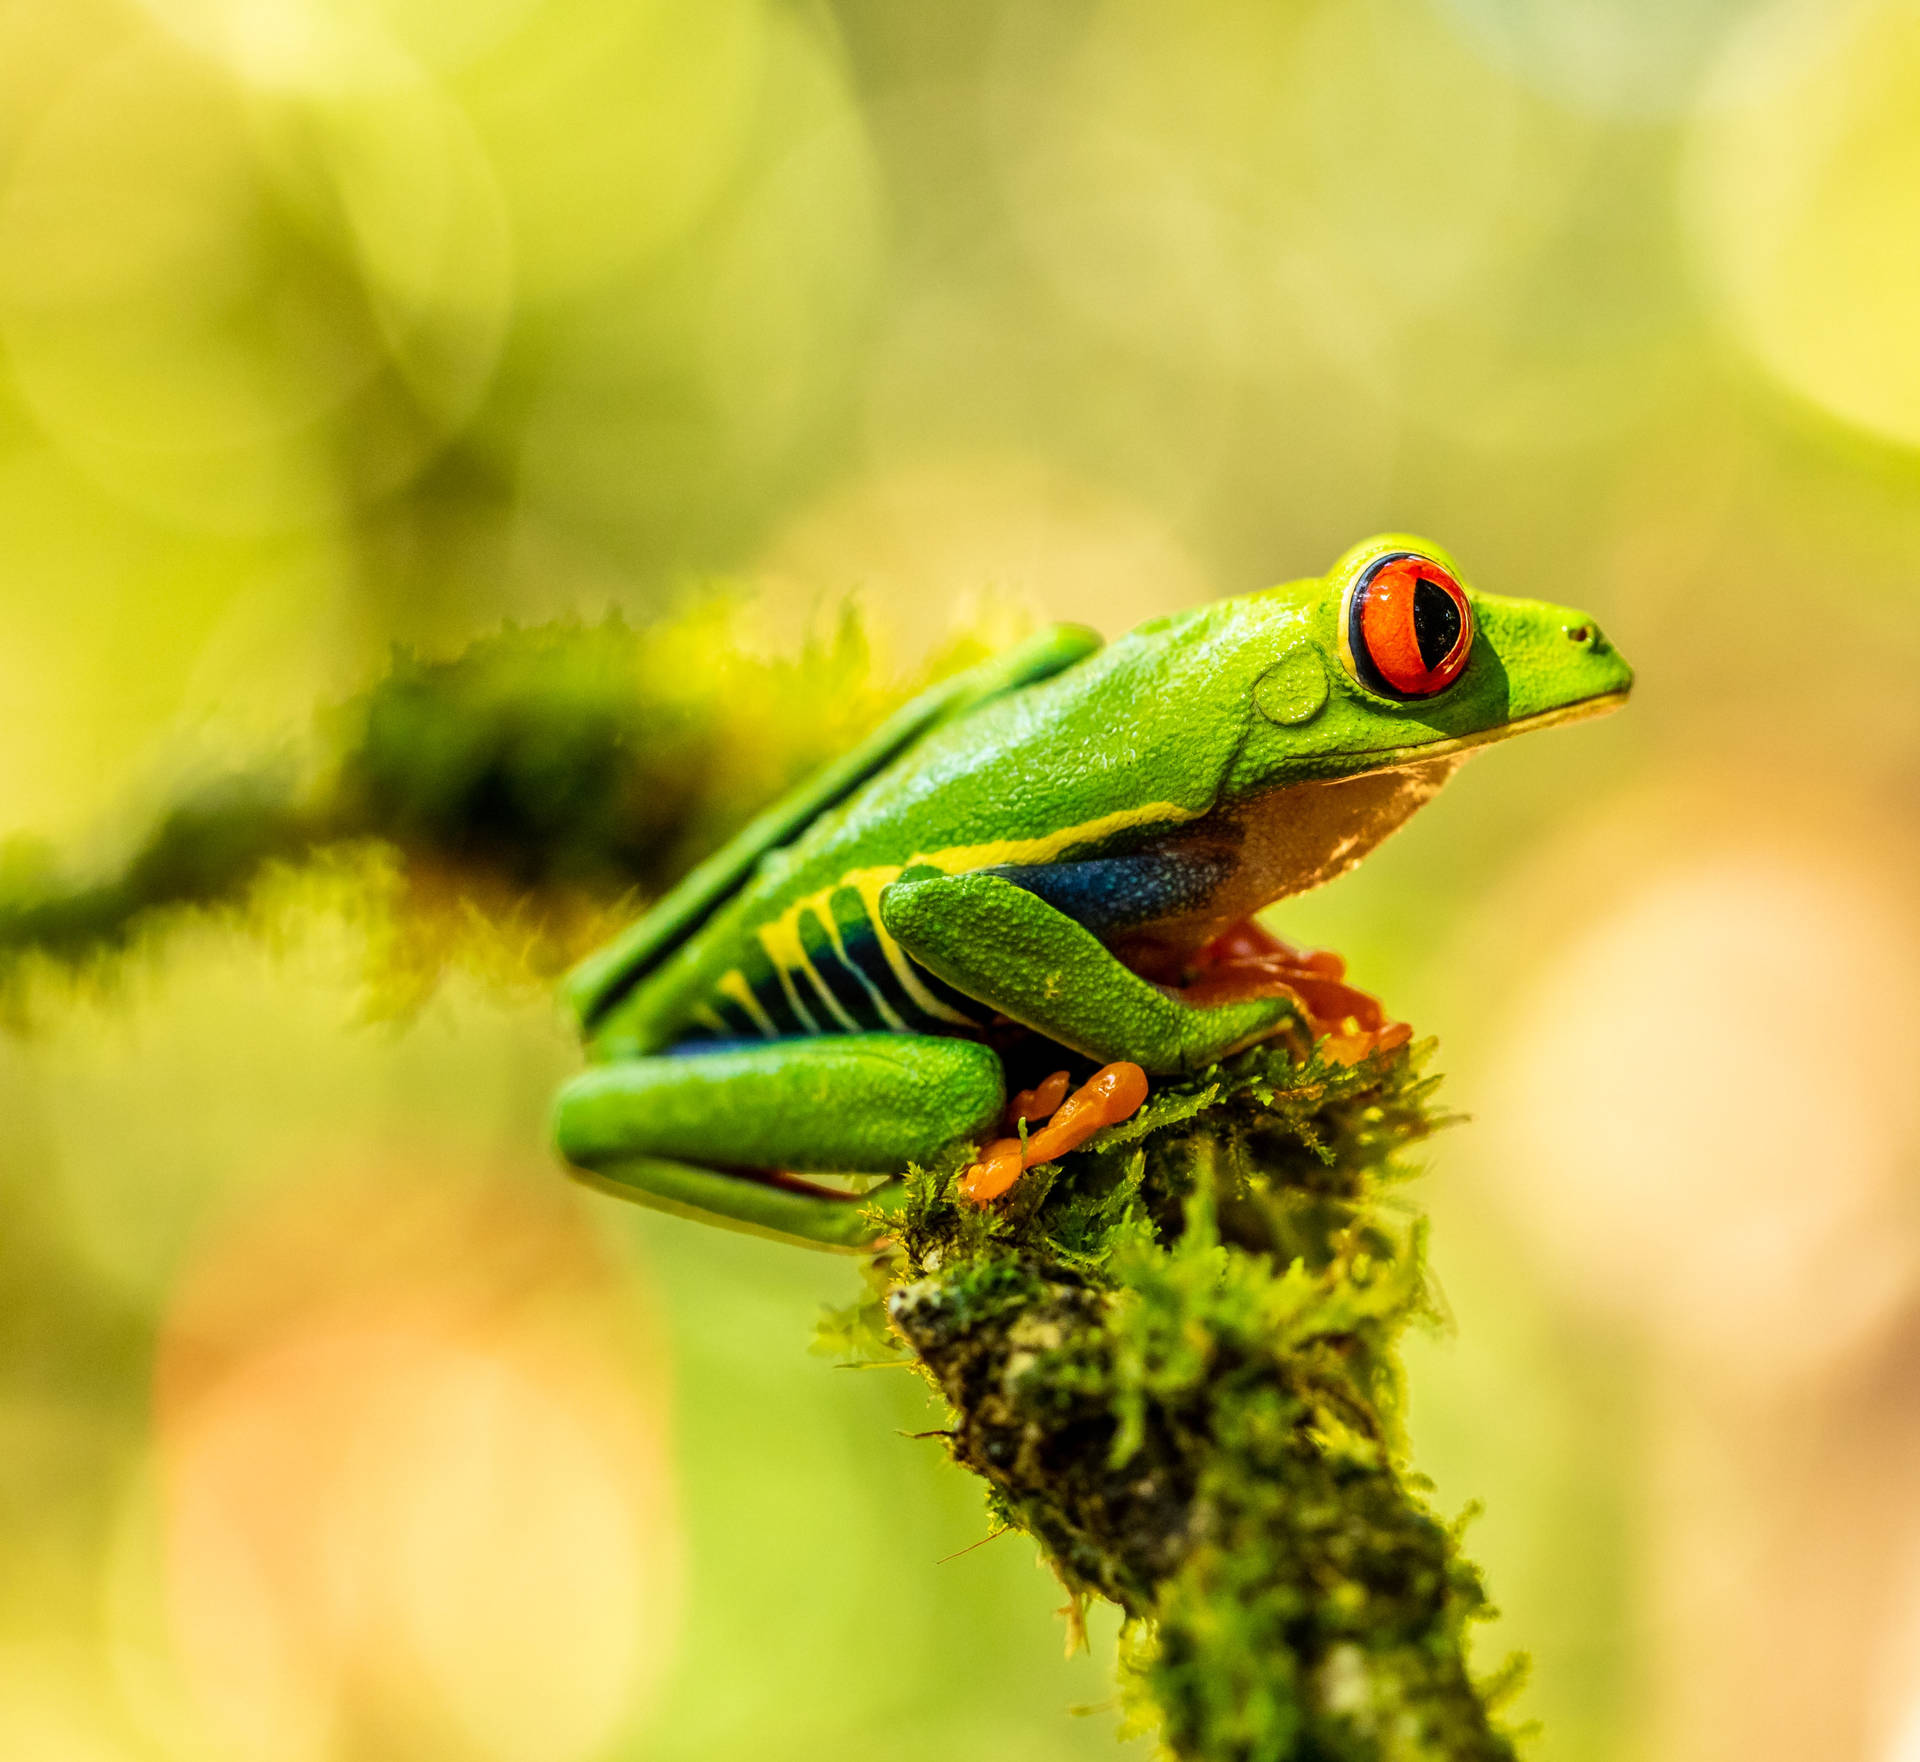 Free Frog Wallpaper Downloads, [100+] Frog Wallpapers for FREE | Wallpapers .com